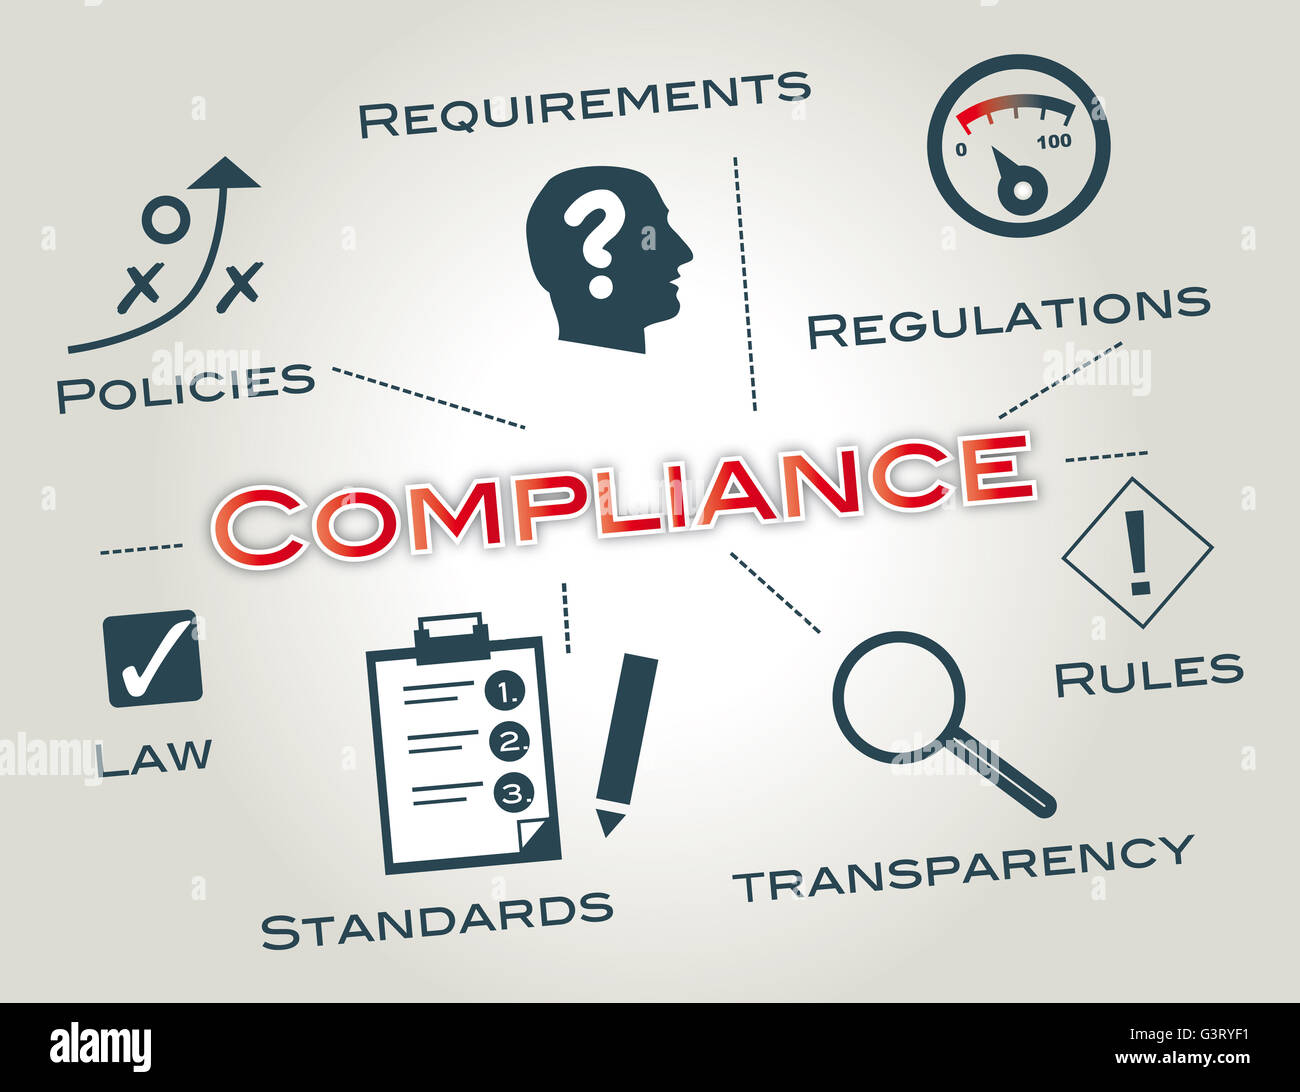 Compliance - Chart with keywords and icons Stock Photo